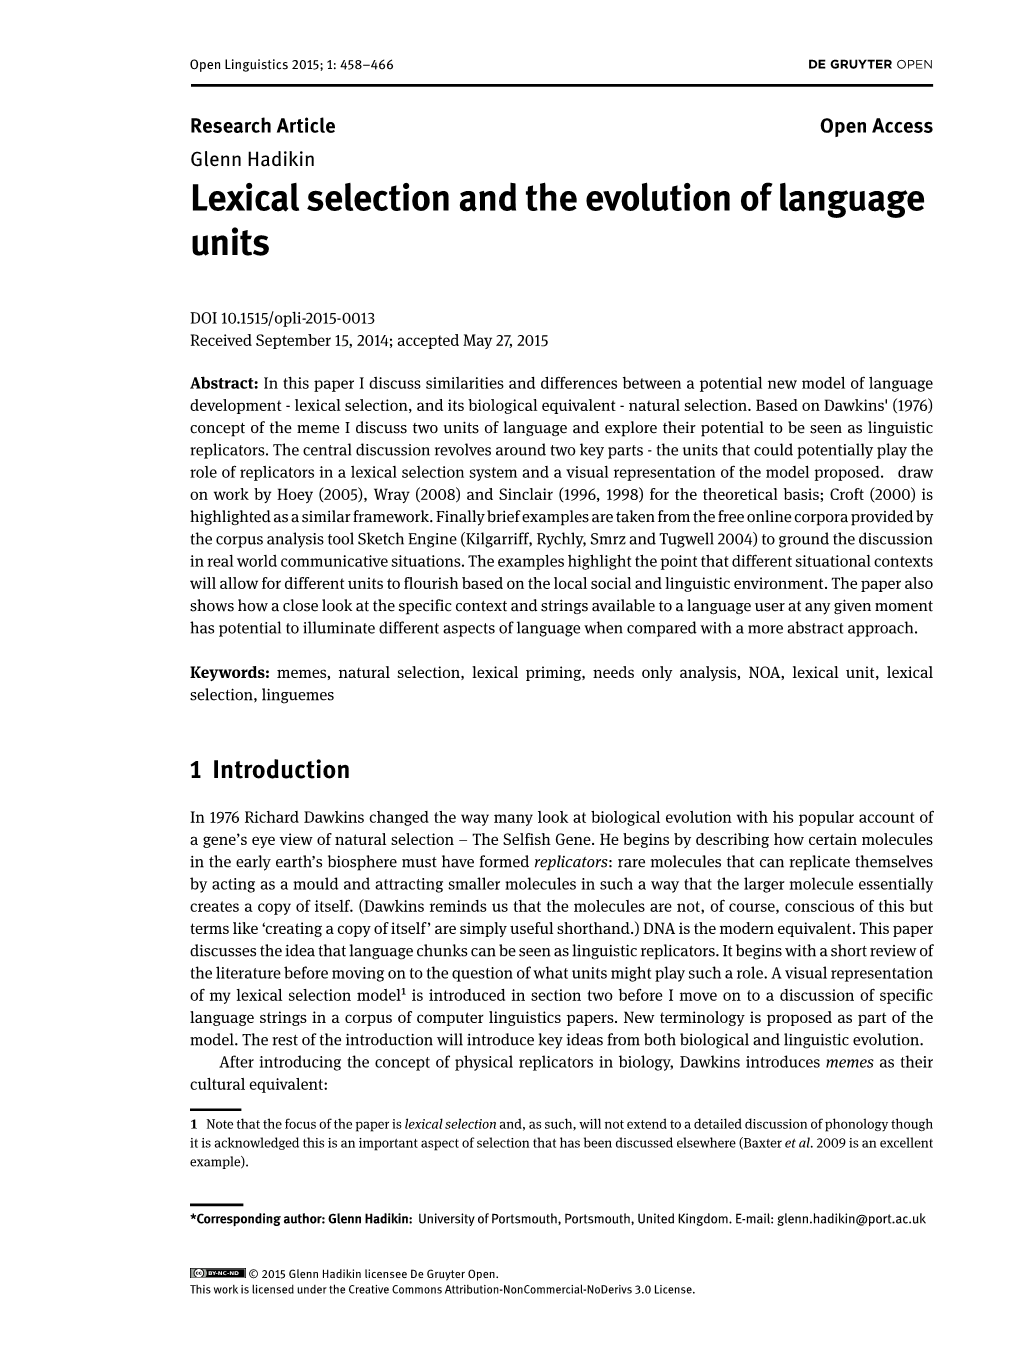 Lexical Selection and the Evolution of Language Units